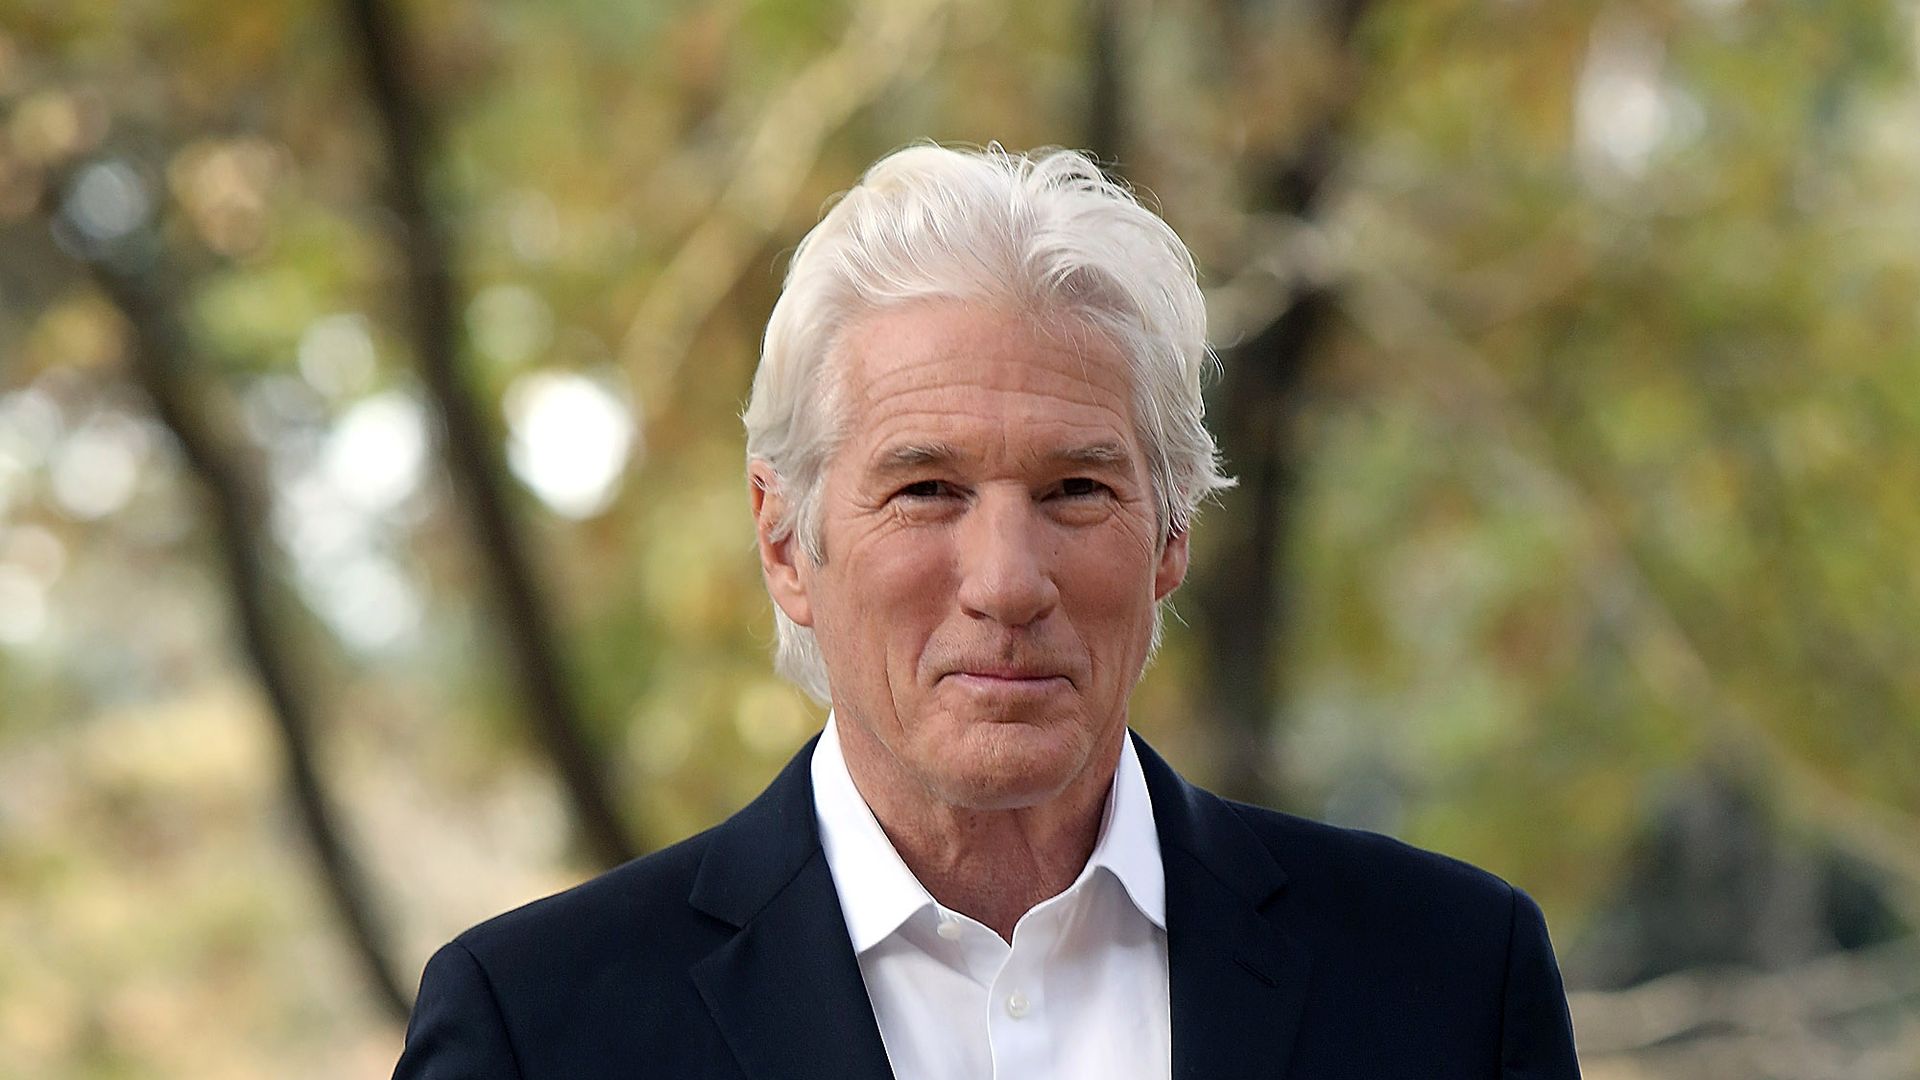 Richard Gere attends a photocall for 'Franny' at Villa Borghese on December 14, 2015 in Rome, Italy